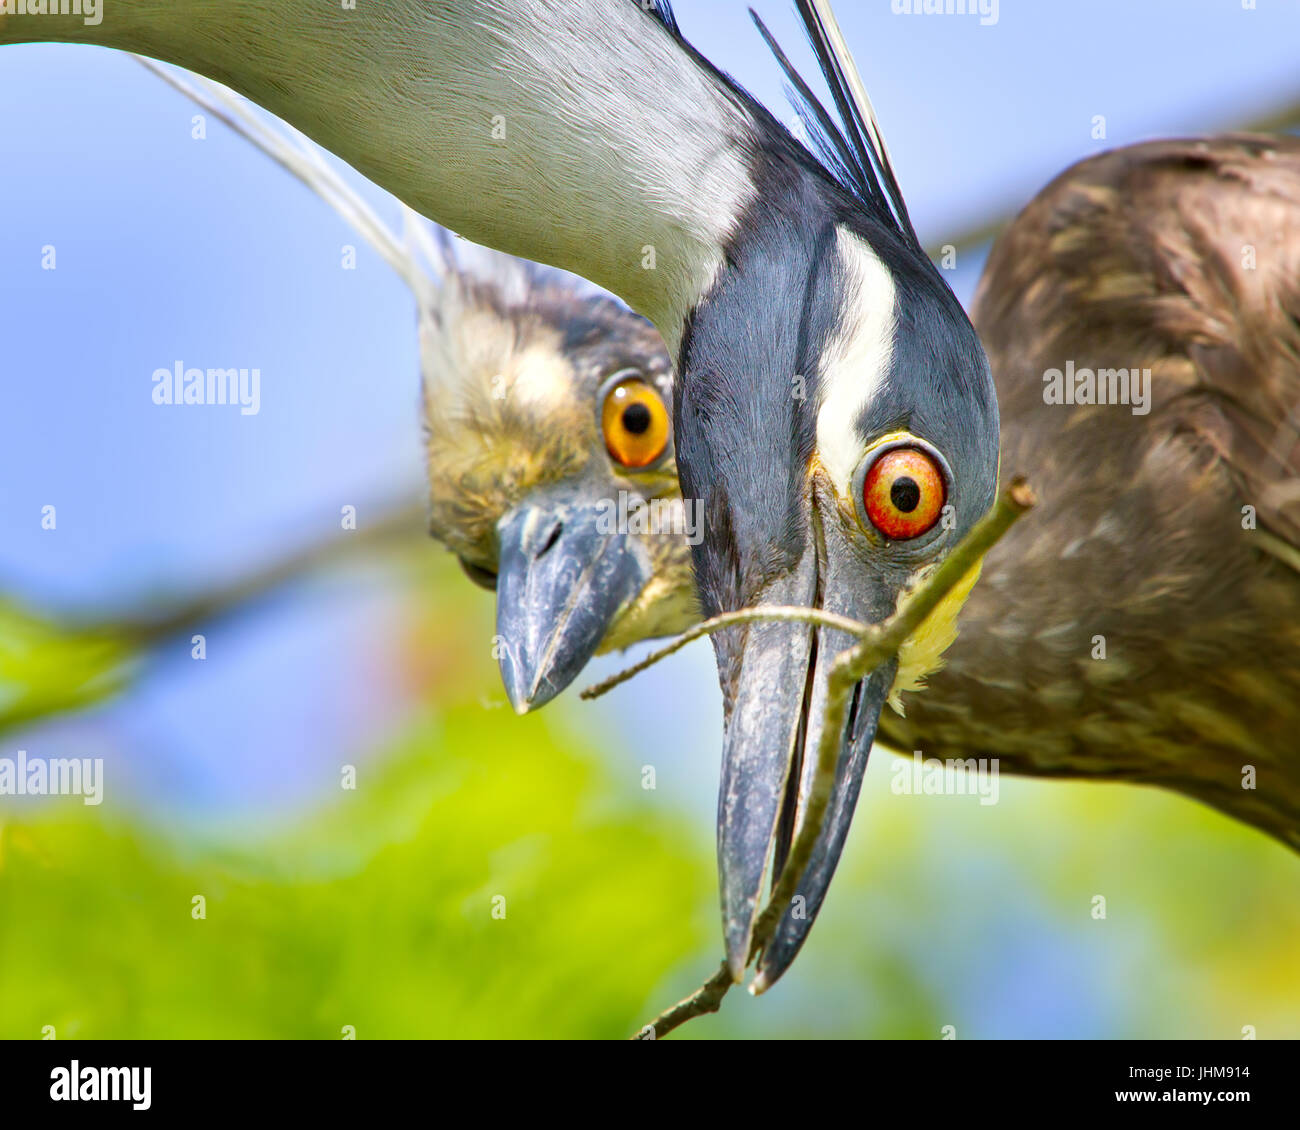 A nesting pair of Yellow Crowned Night Herons build their nest in the Florida Everglades. The male brings back twigs for the female's approval. Stock Photo